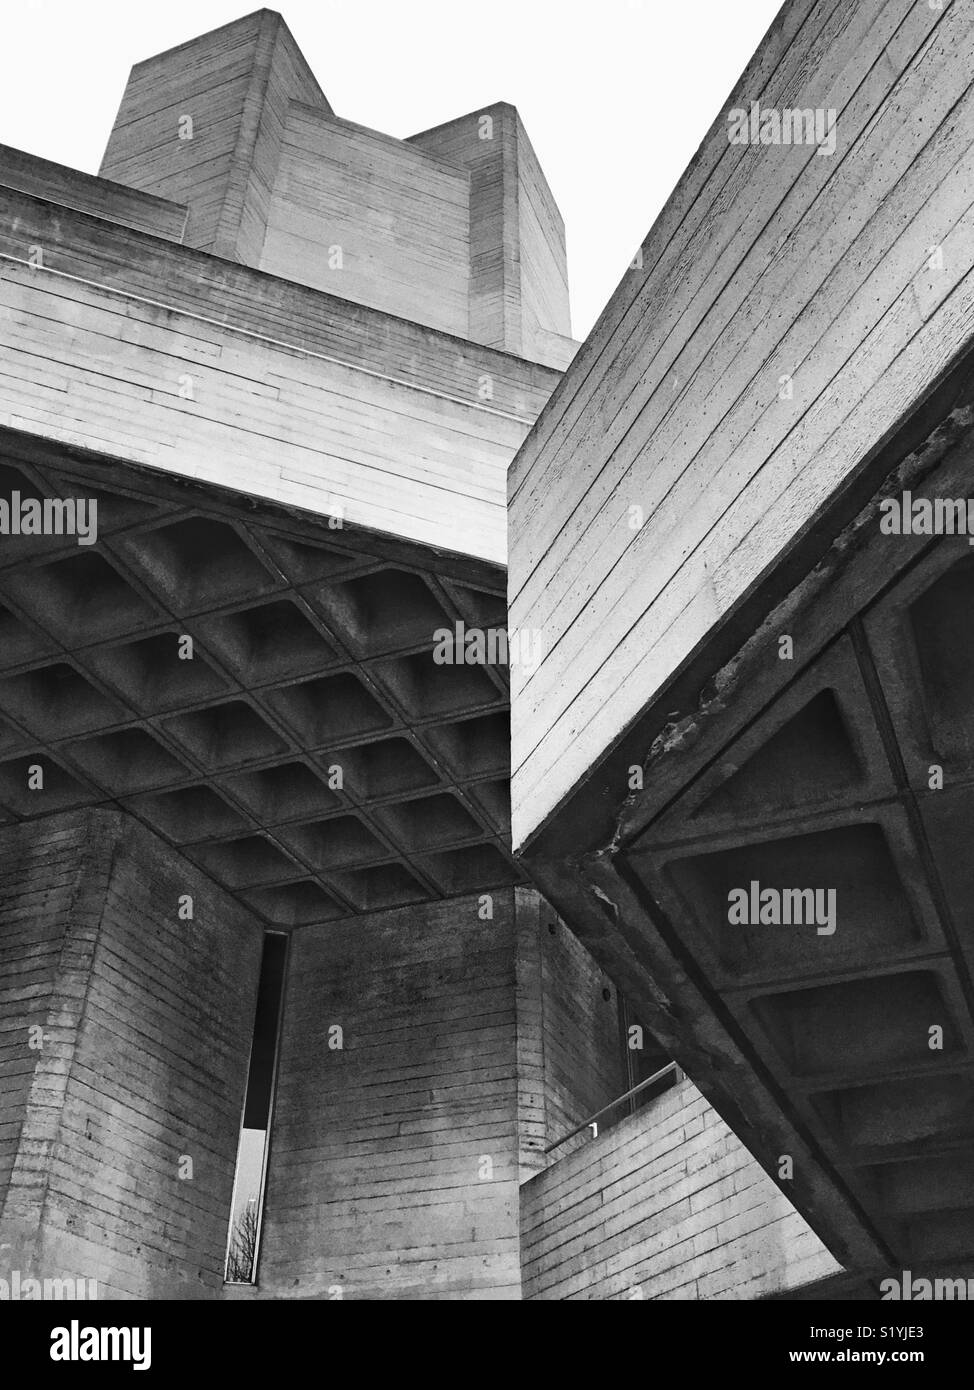 Brutalist architecture at the National Theatre London Stock Photo